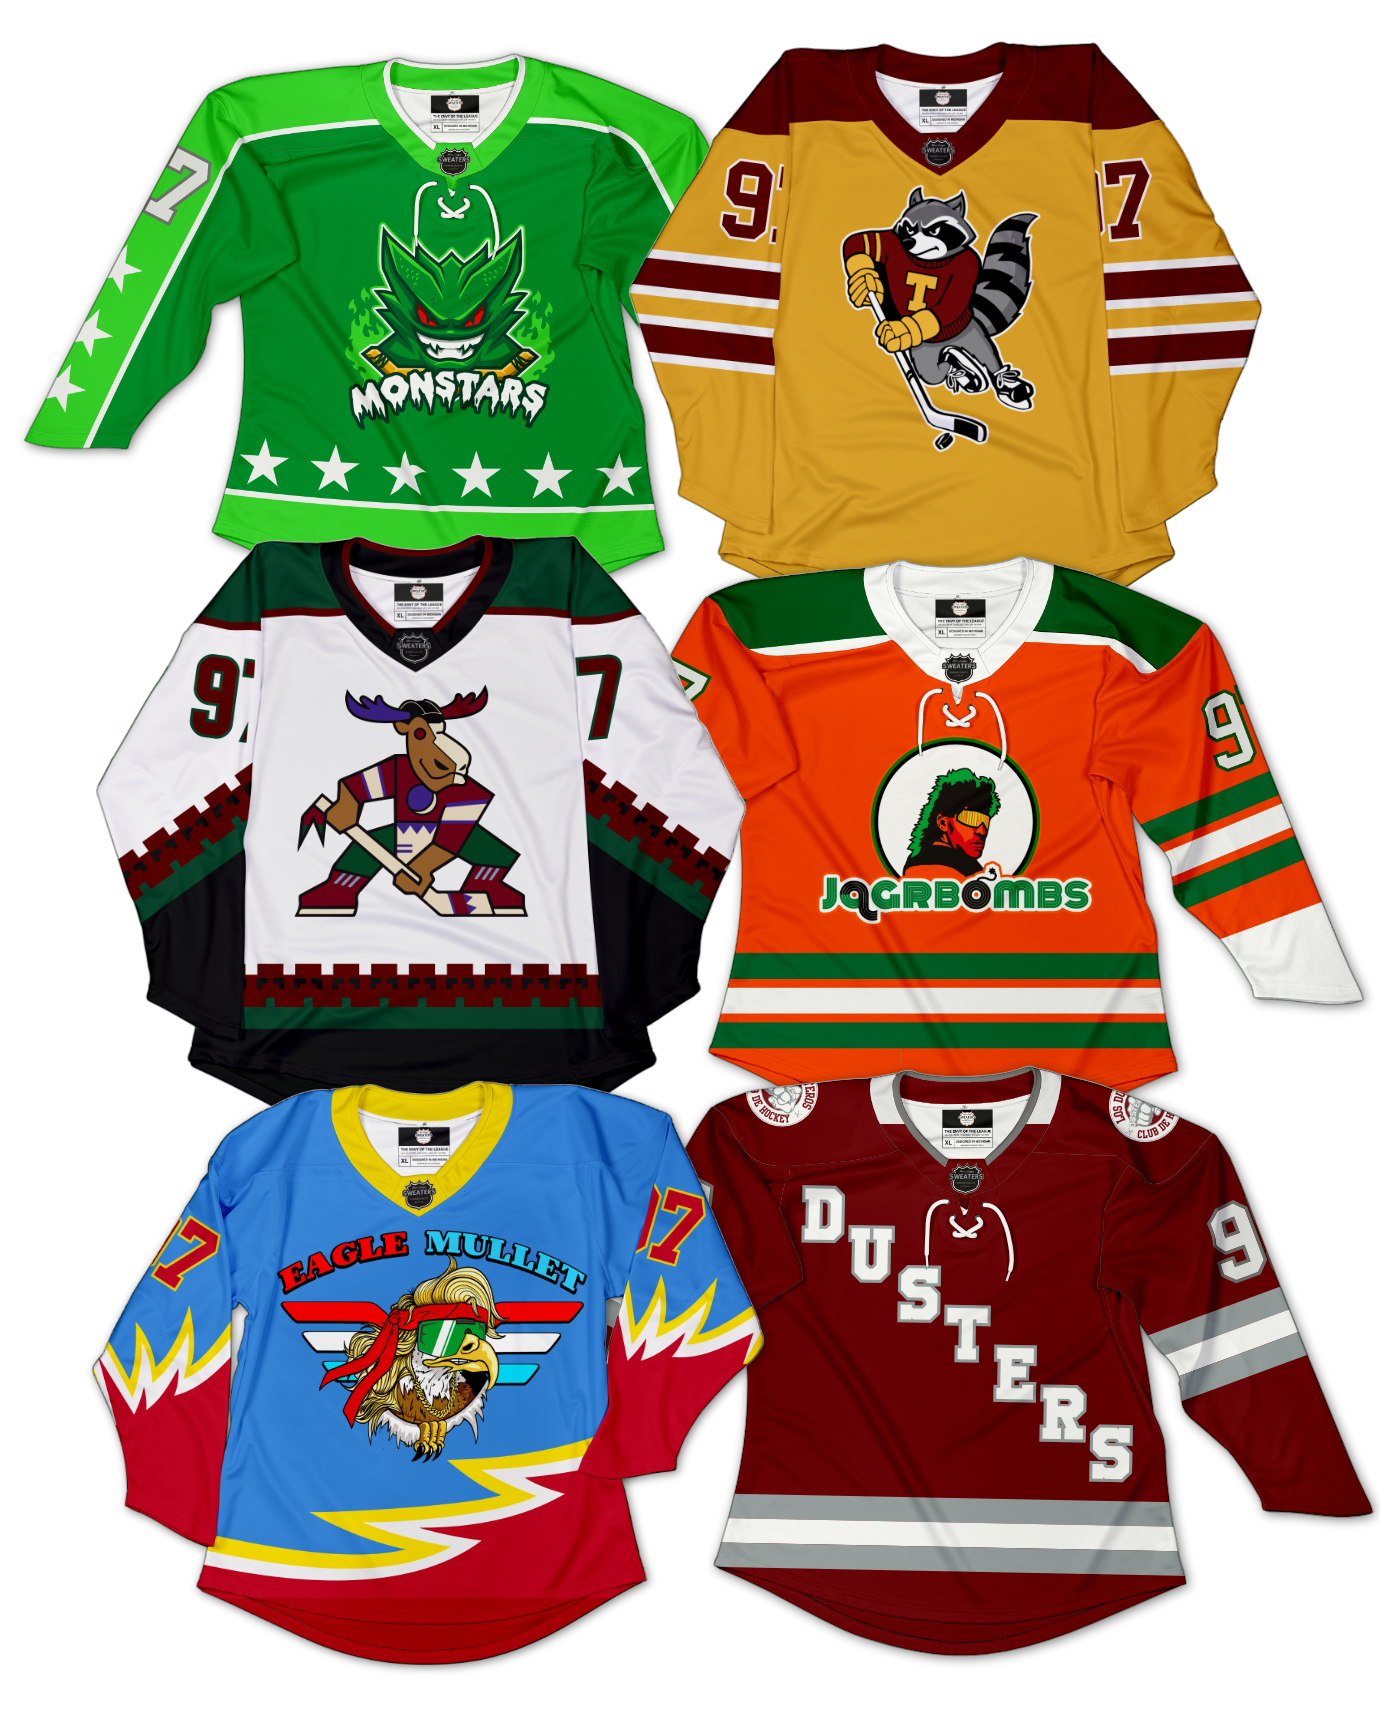 Top 10 Nicest Current NHL Jerseys